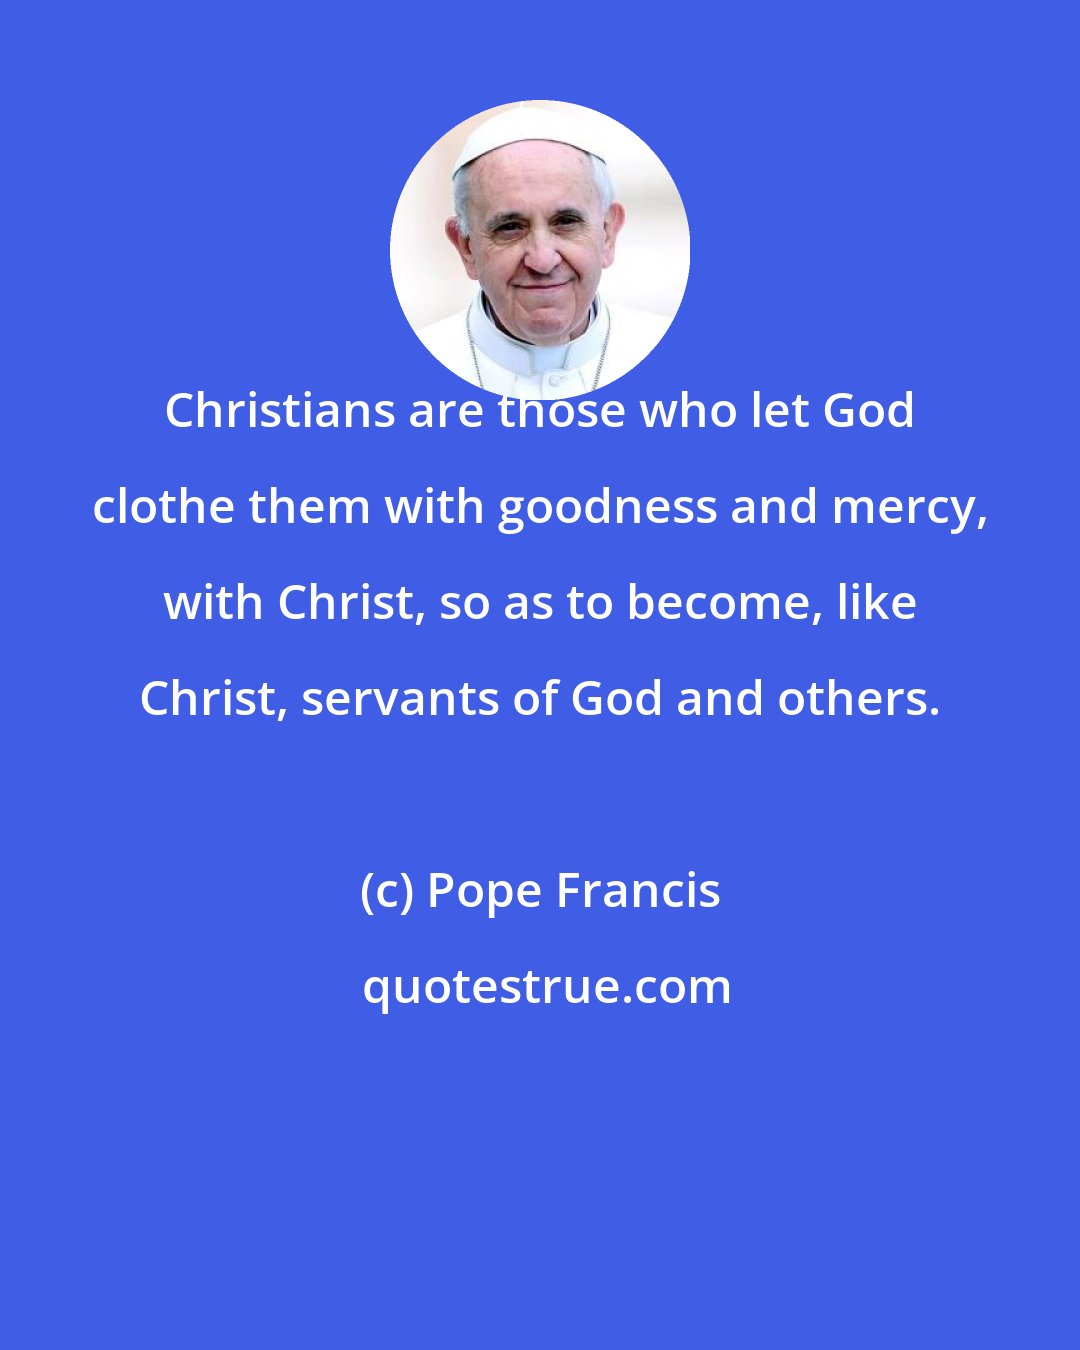 Pope Francis: Christians are those who let God clothe them with goodness and mercy, with Christ, so as to become, like Christ, servants of God and others.